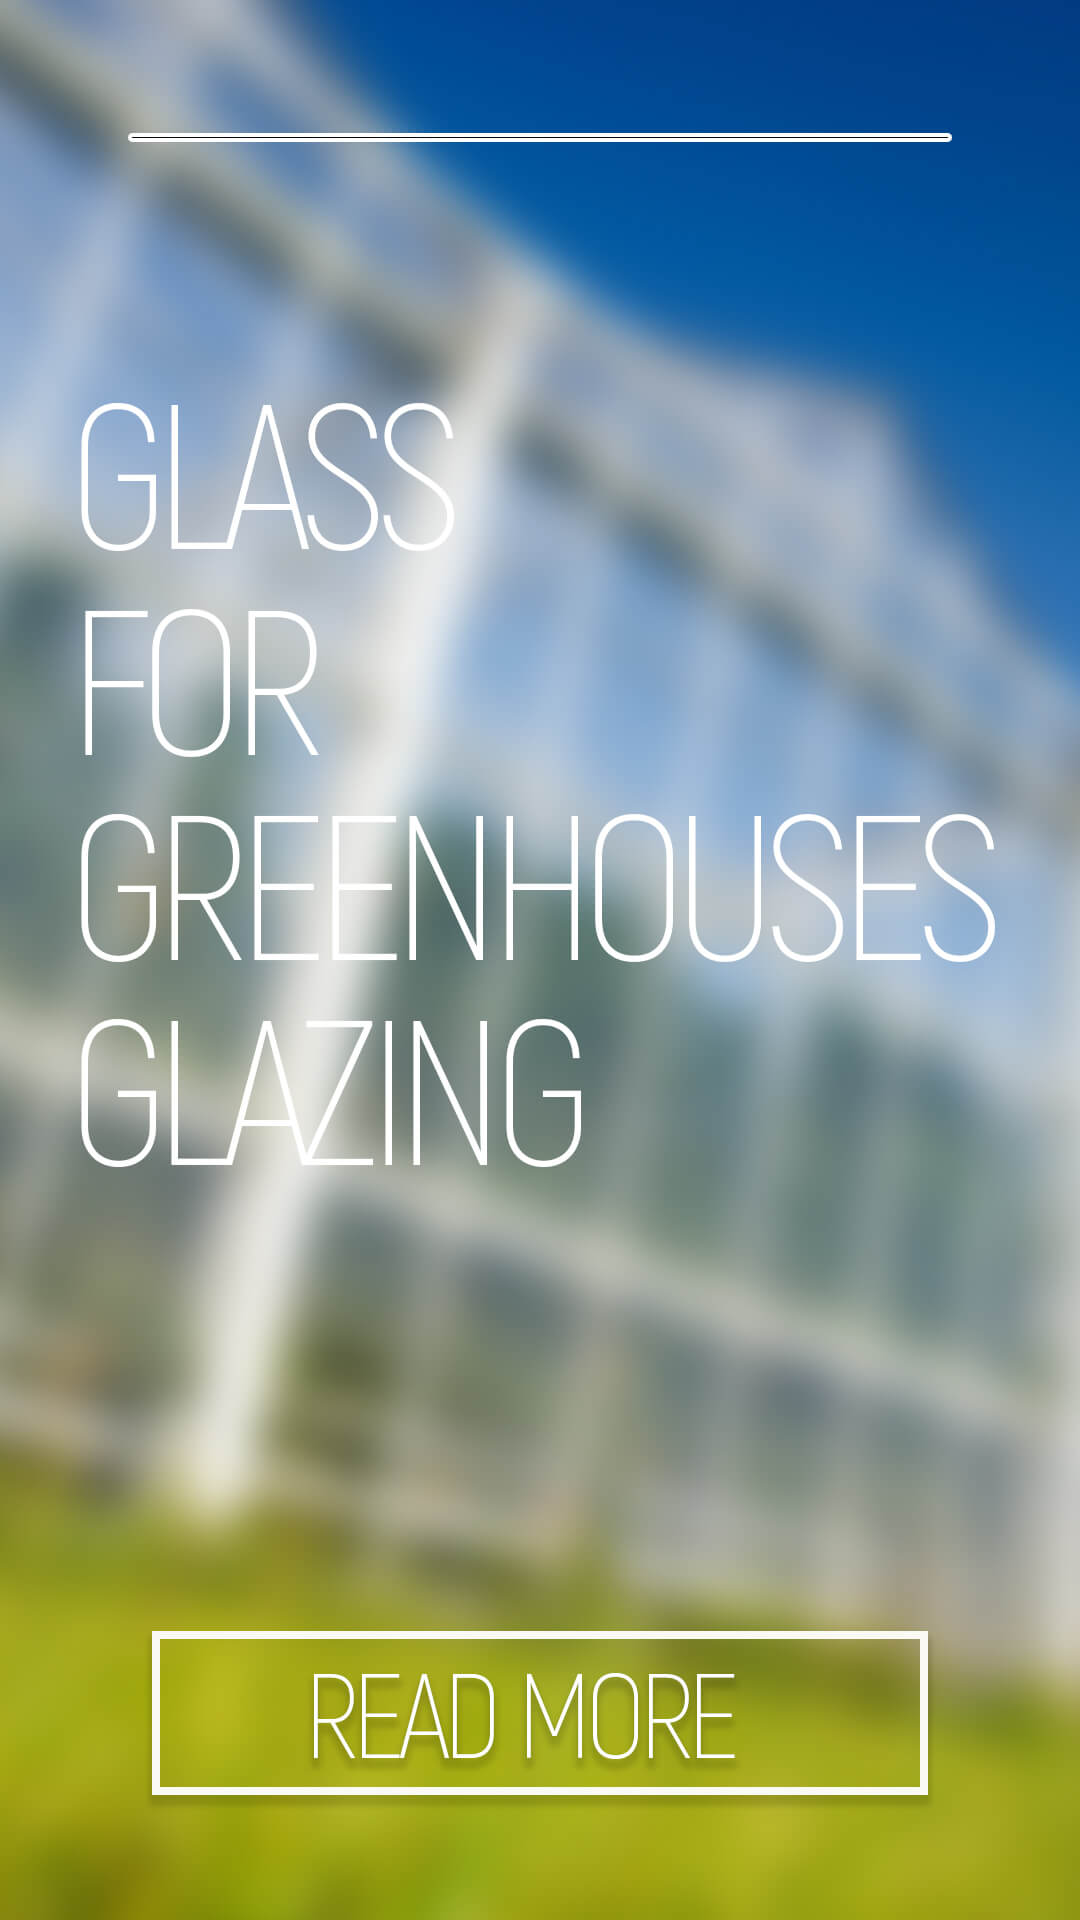 GLASS FOR GREENHOUSES GLAZING